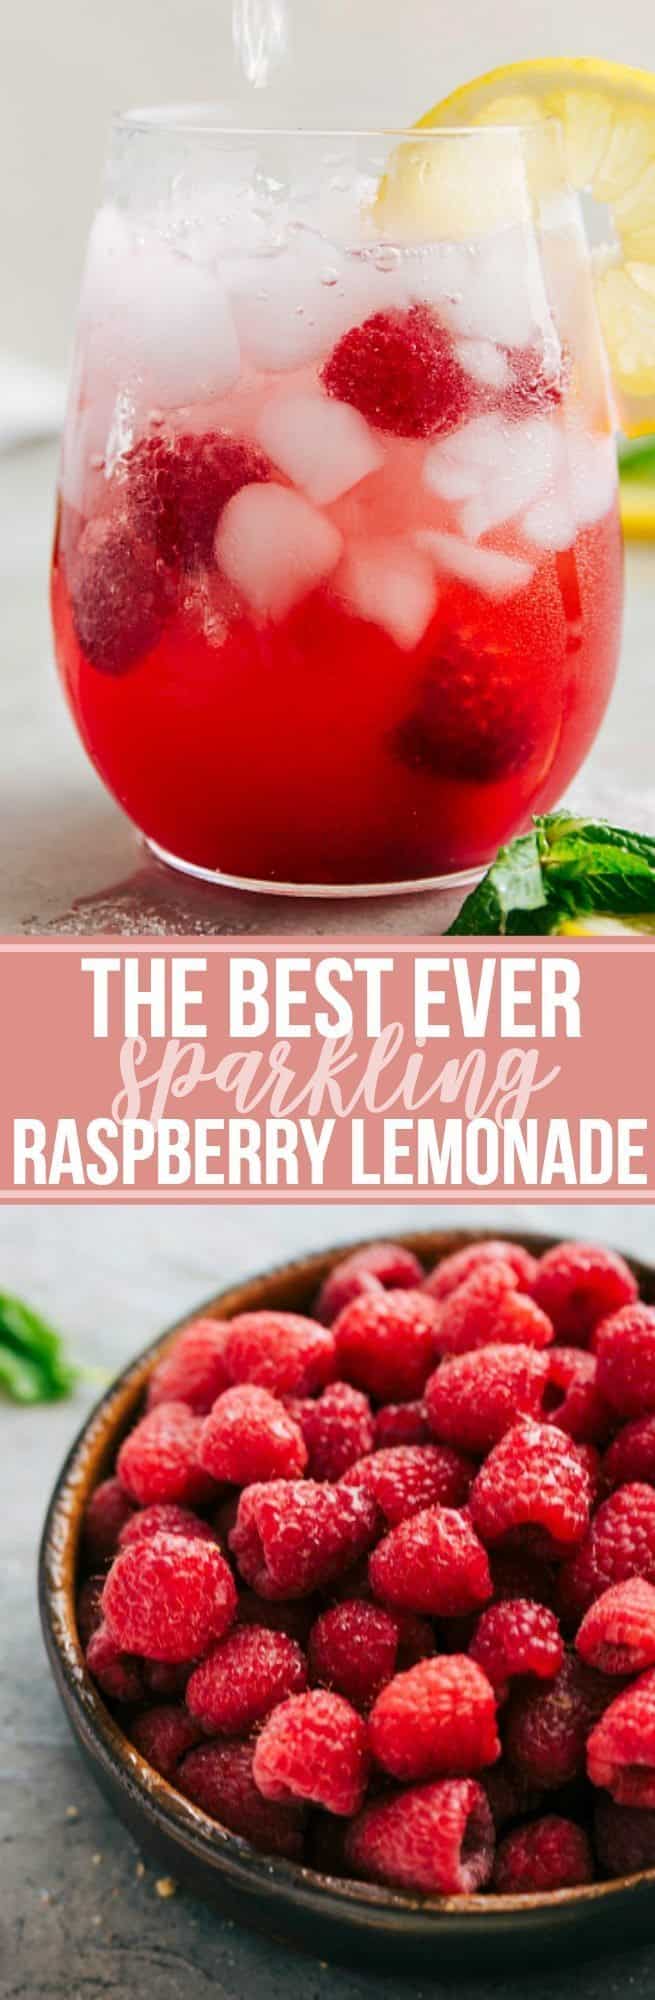 The ultimate BEST EVER Sparkling Raspberry Lemonade! The first drink to go at a party! via chelseasmessyapron.com